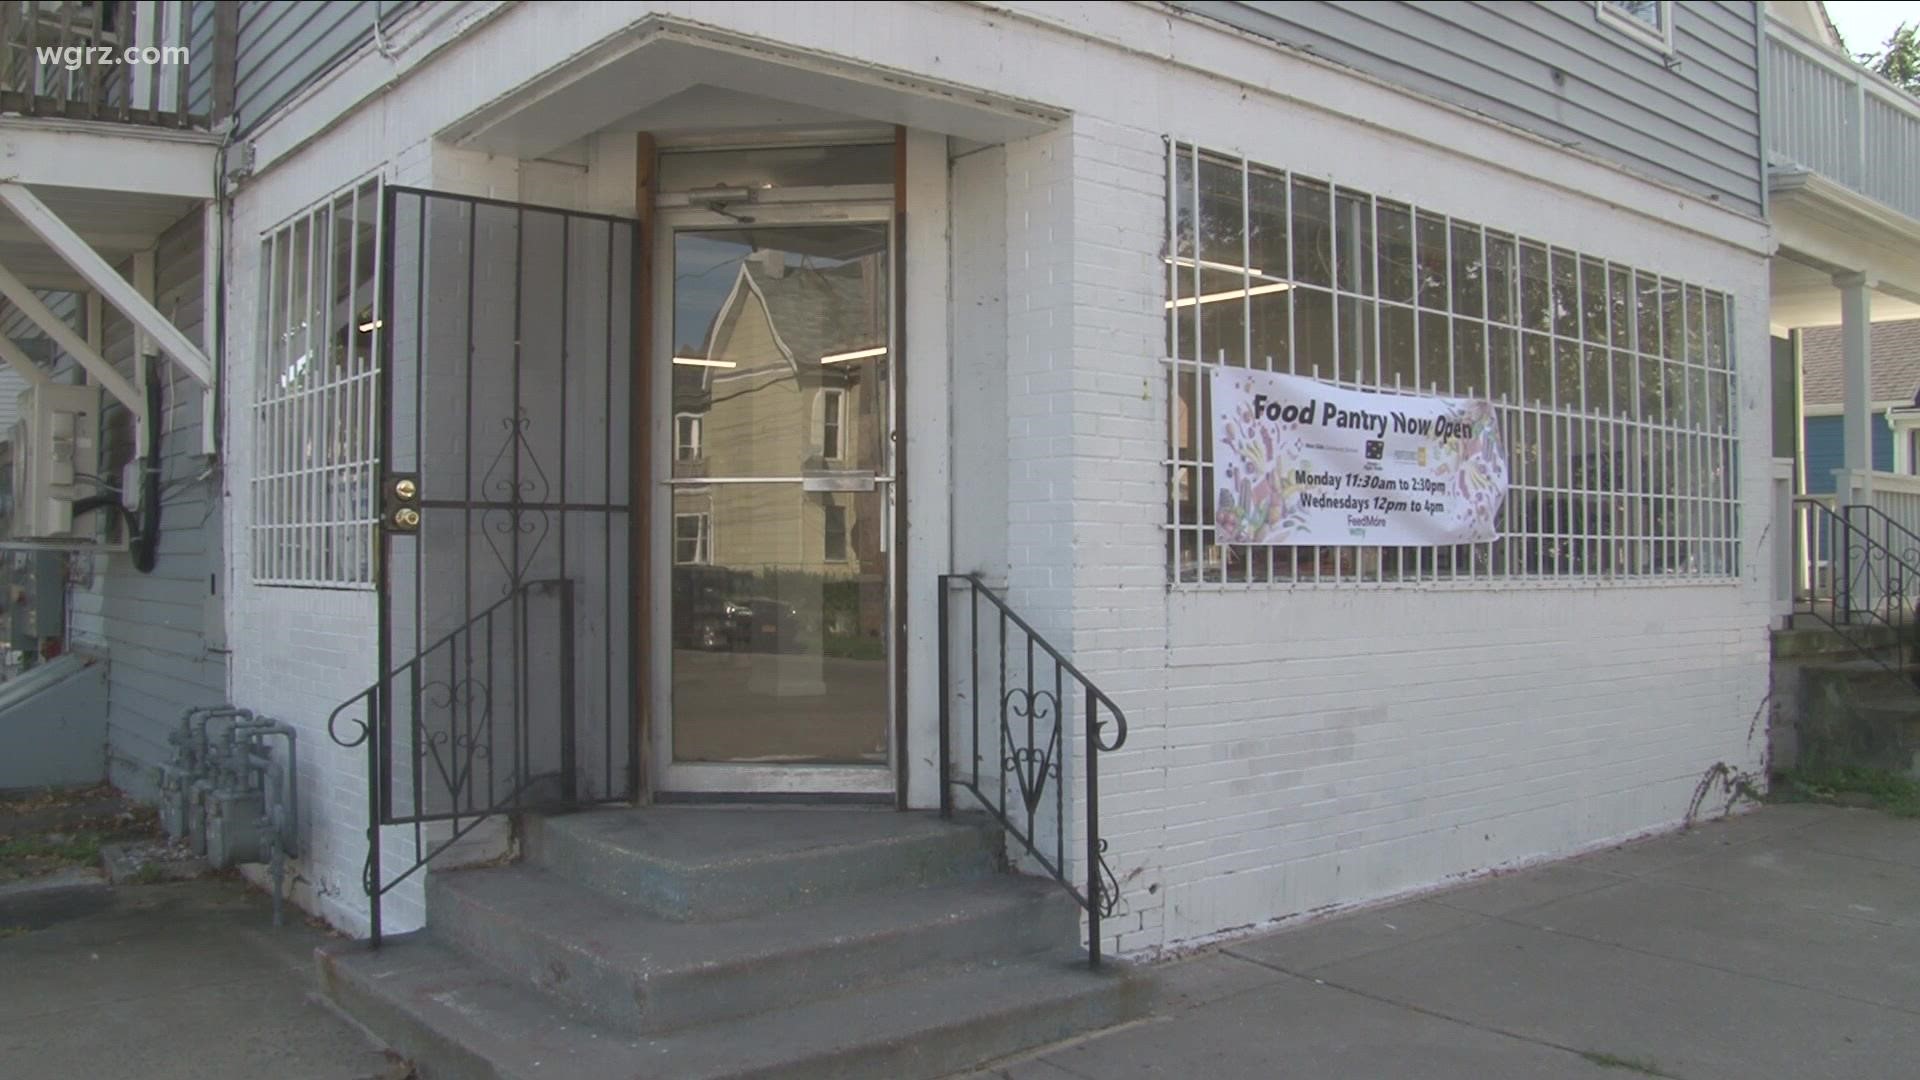 The soup kitchen will remain open, continuing to serve meals at the Hudson location.